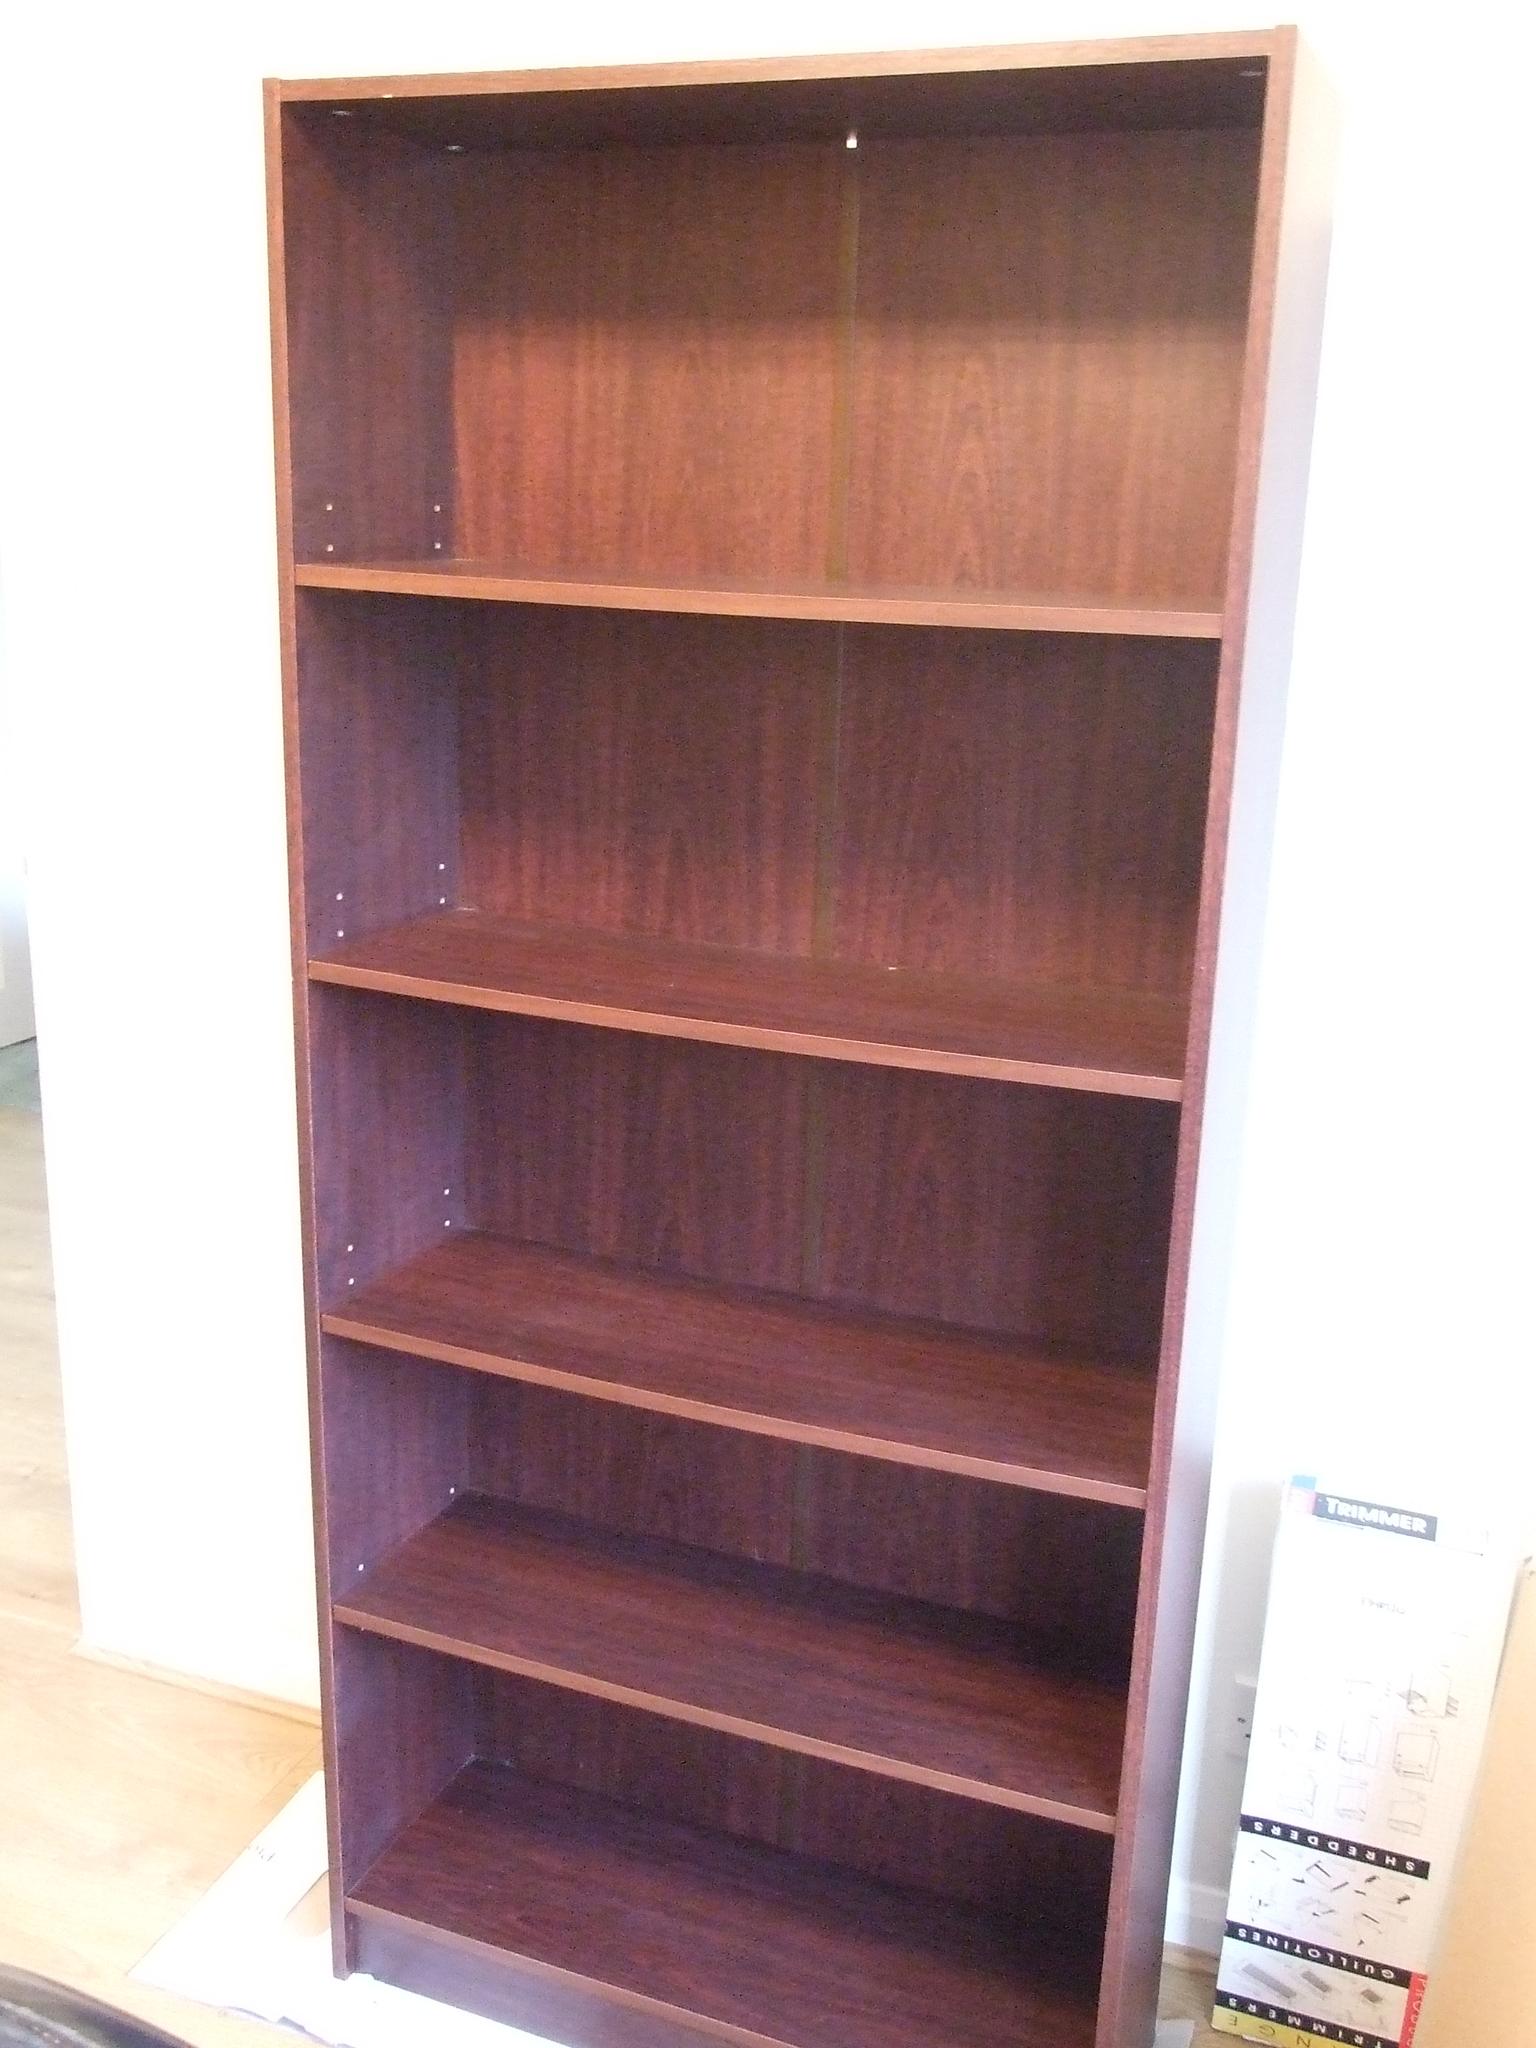 Large Bookcase Mahogany Effect In Nn4 Northampton For 13 00 For